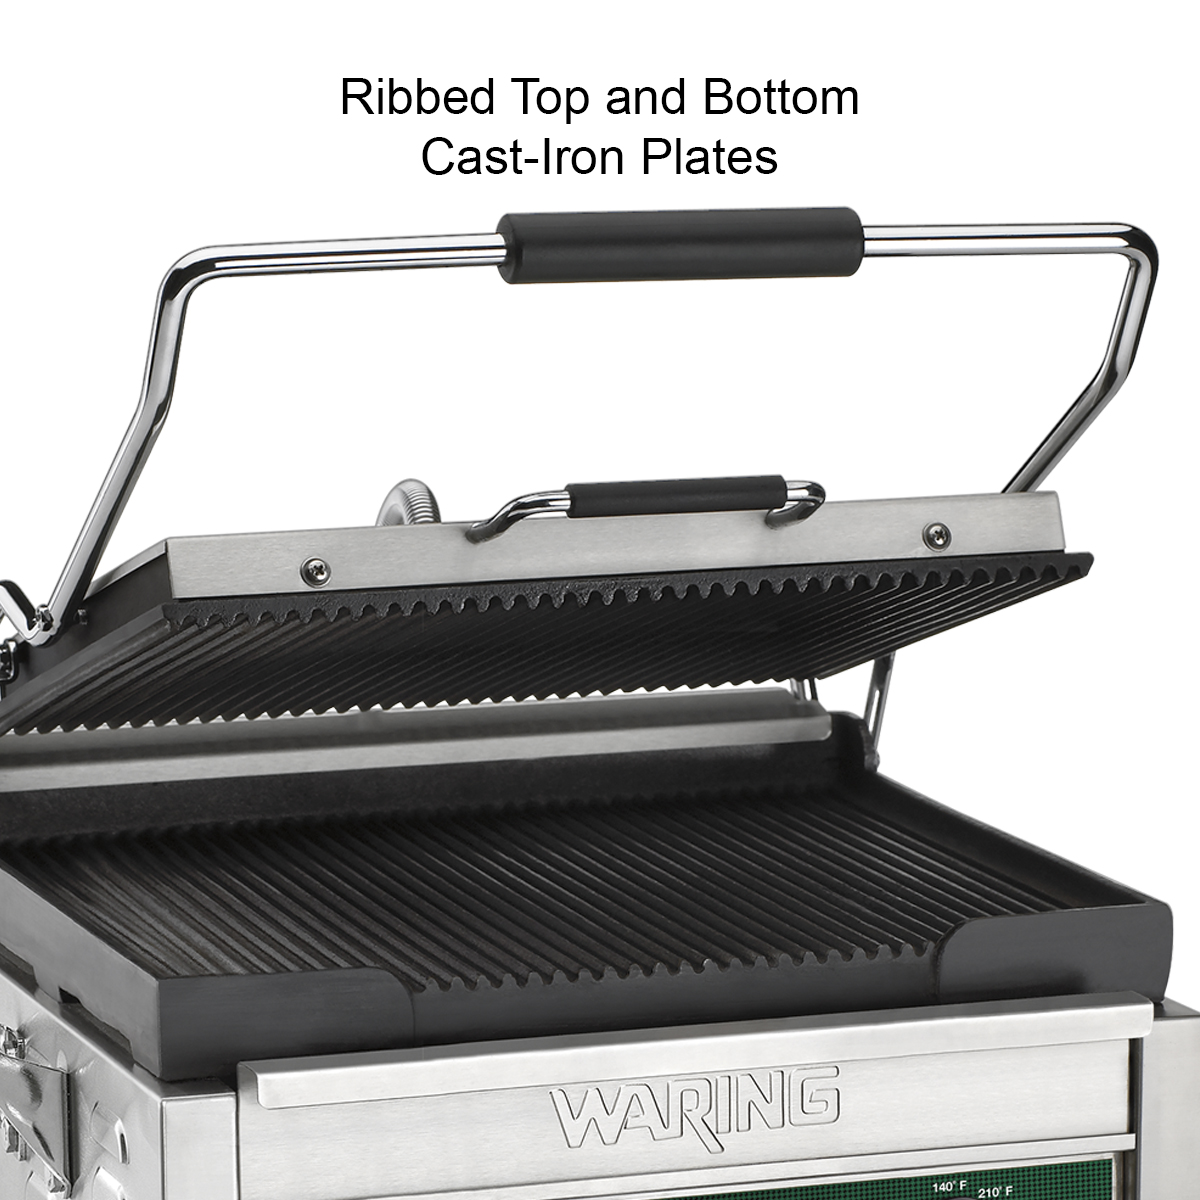 Waring Commercial Large Italian-Style Panini Grill – 120V